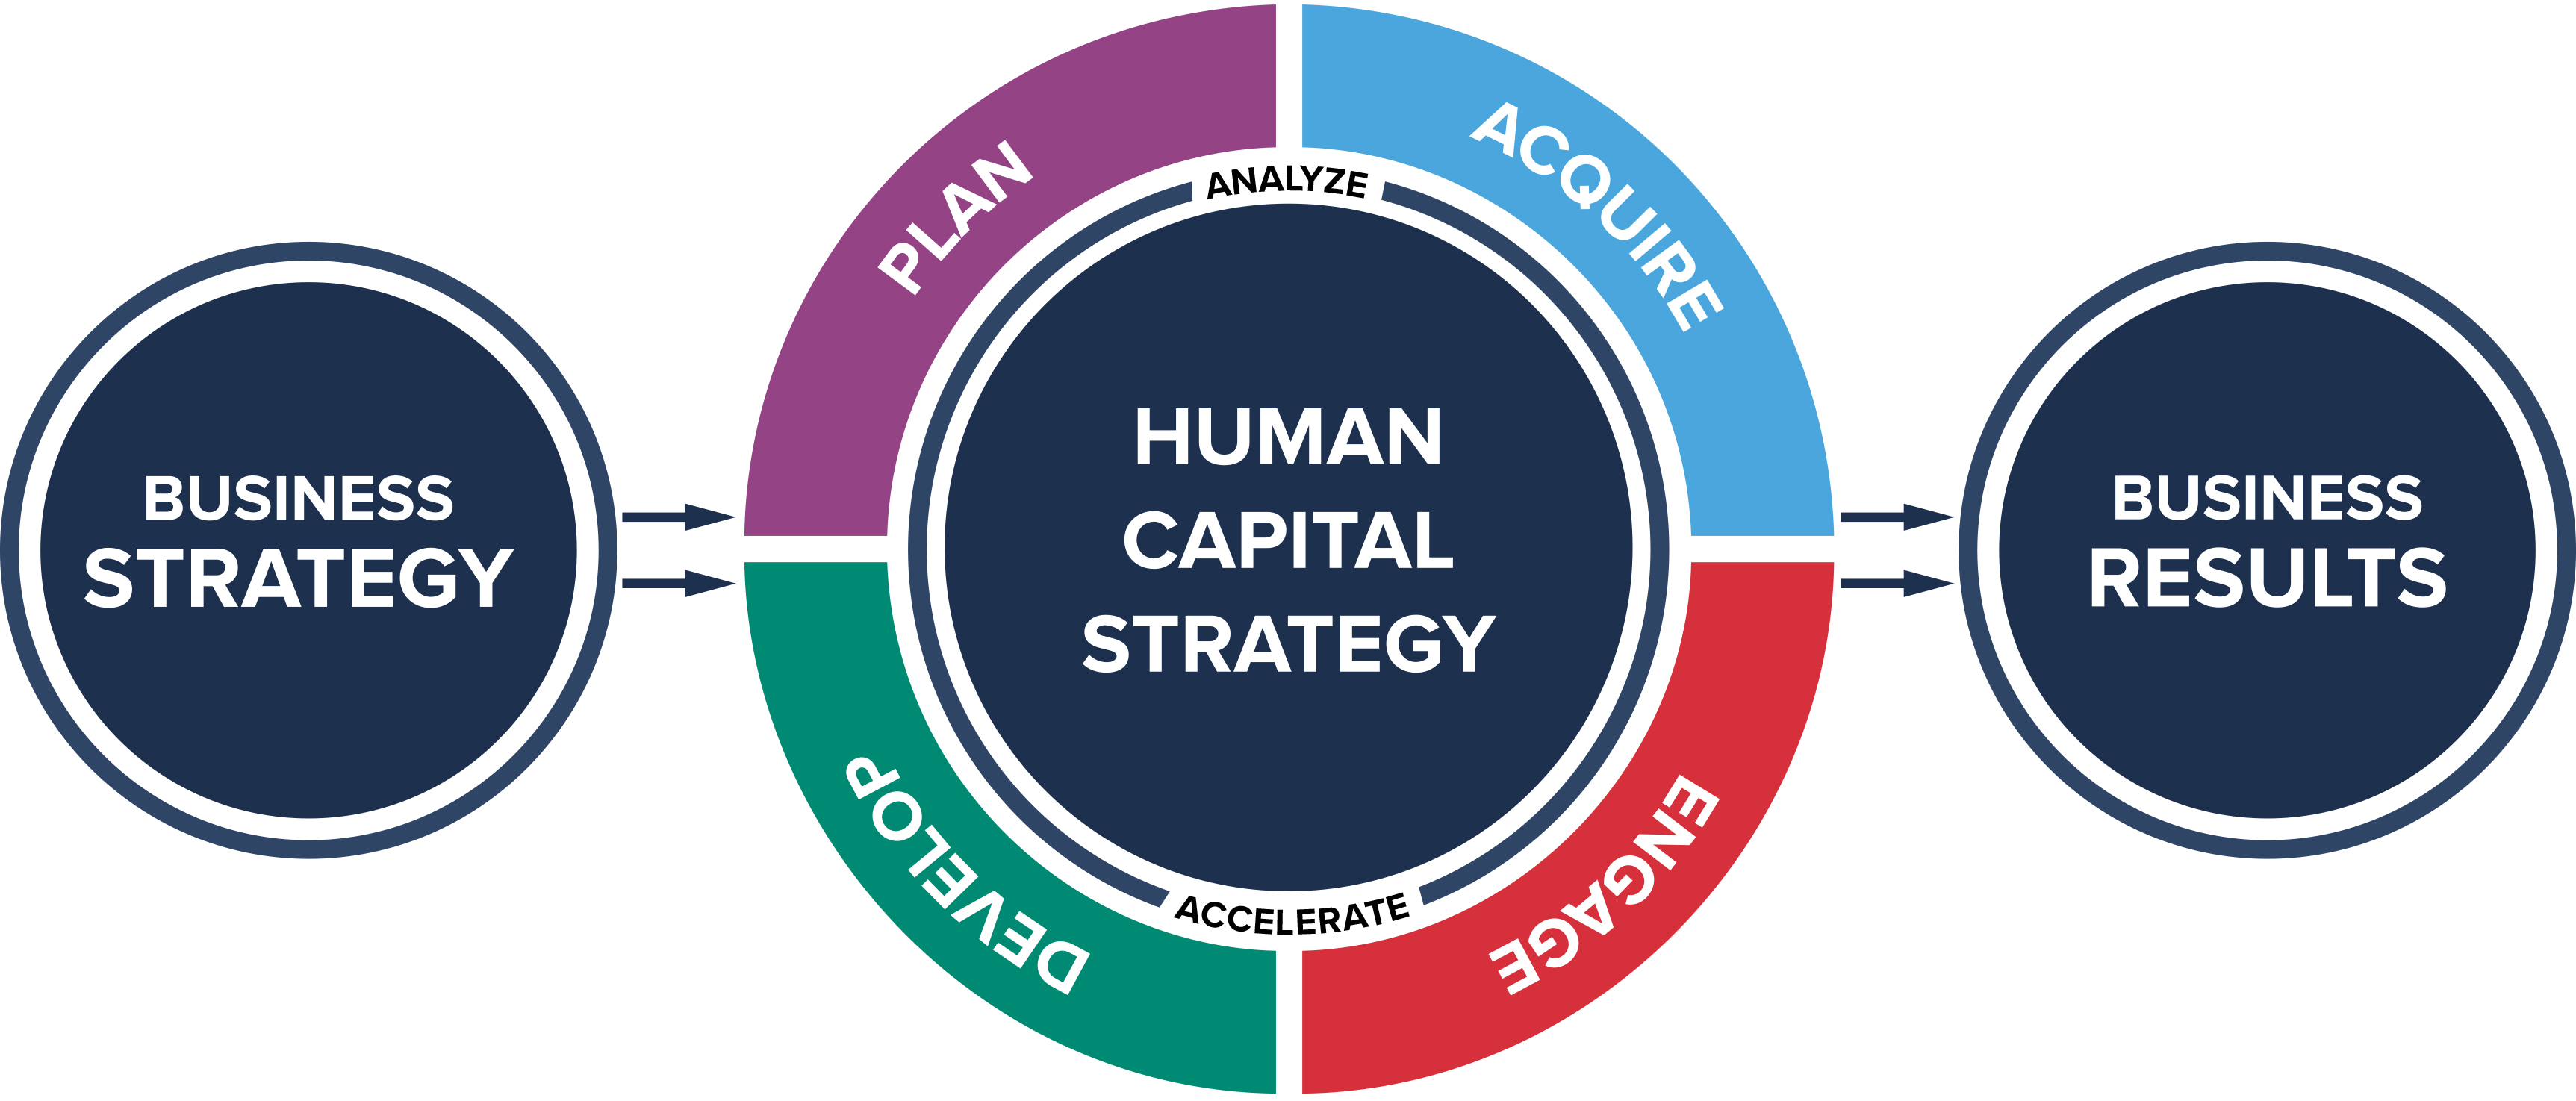 About HCI Human Capital Institute